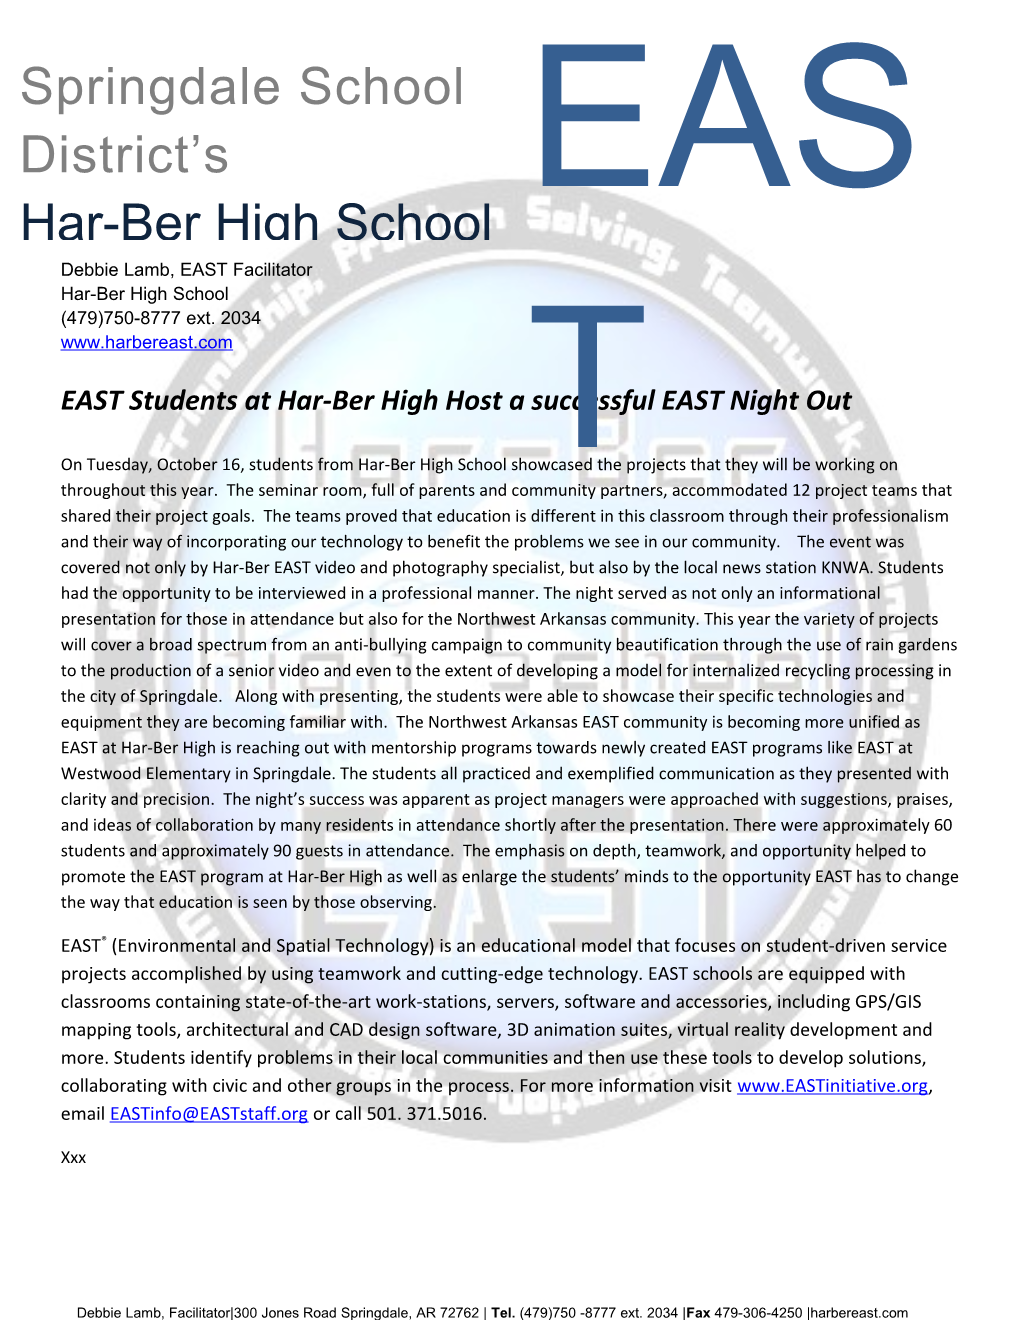 EAST Students at Har-Ber High Host a Successful EAST Night Out